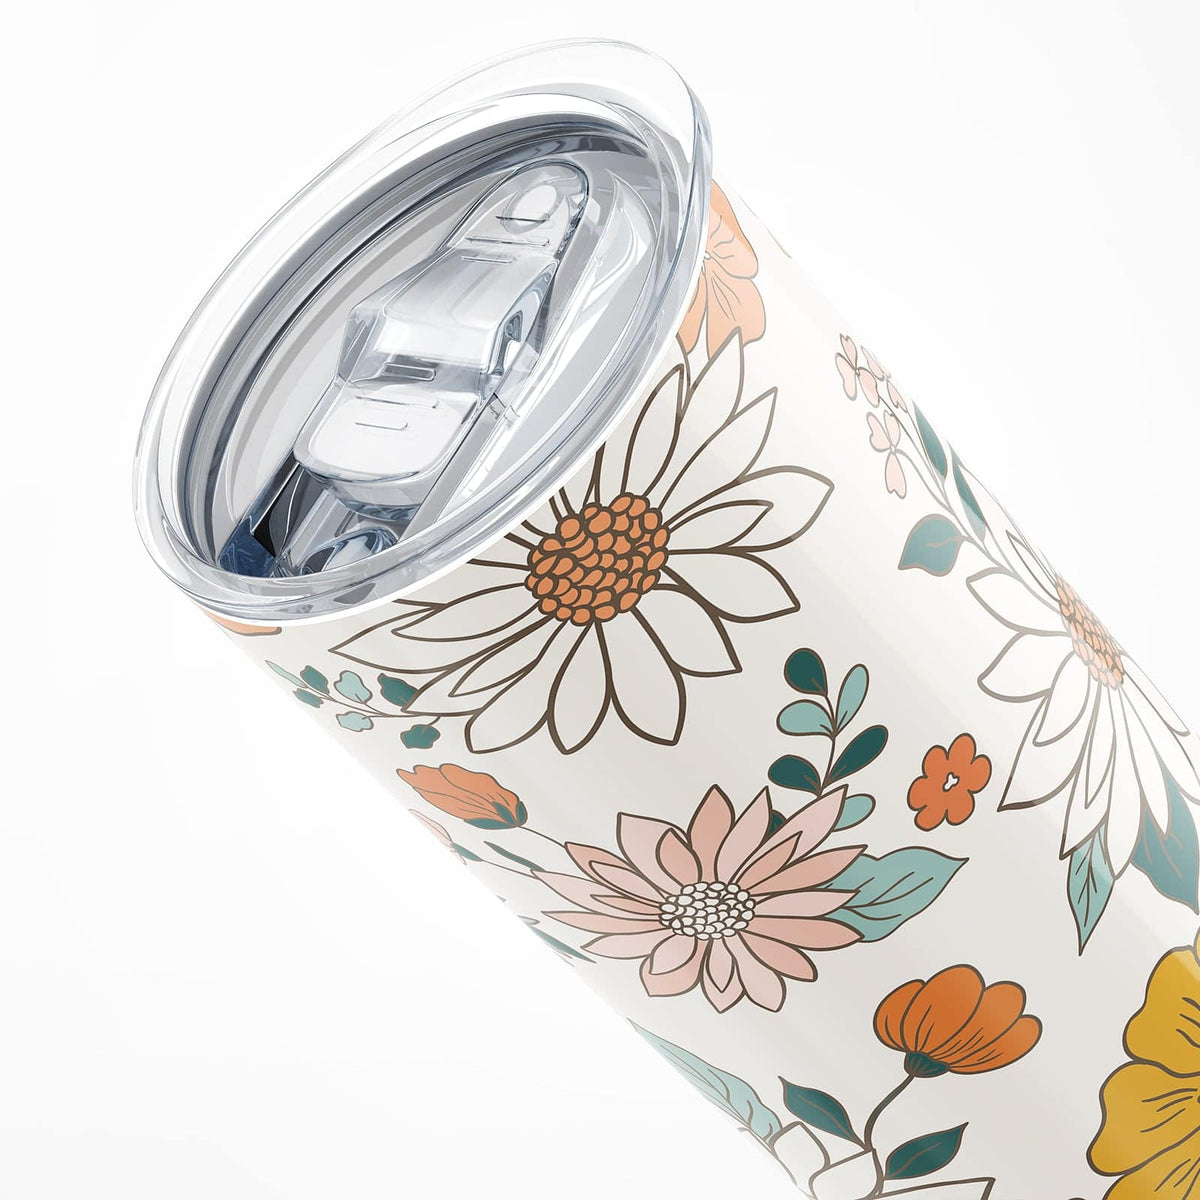 White Floral Insulated 20oz Tumbler